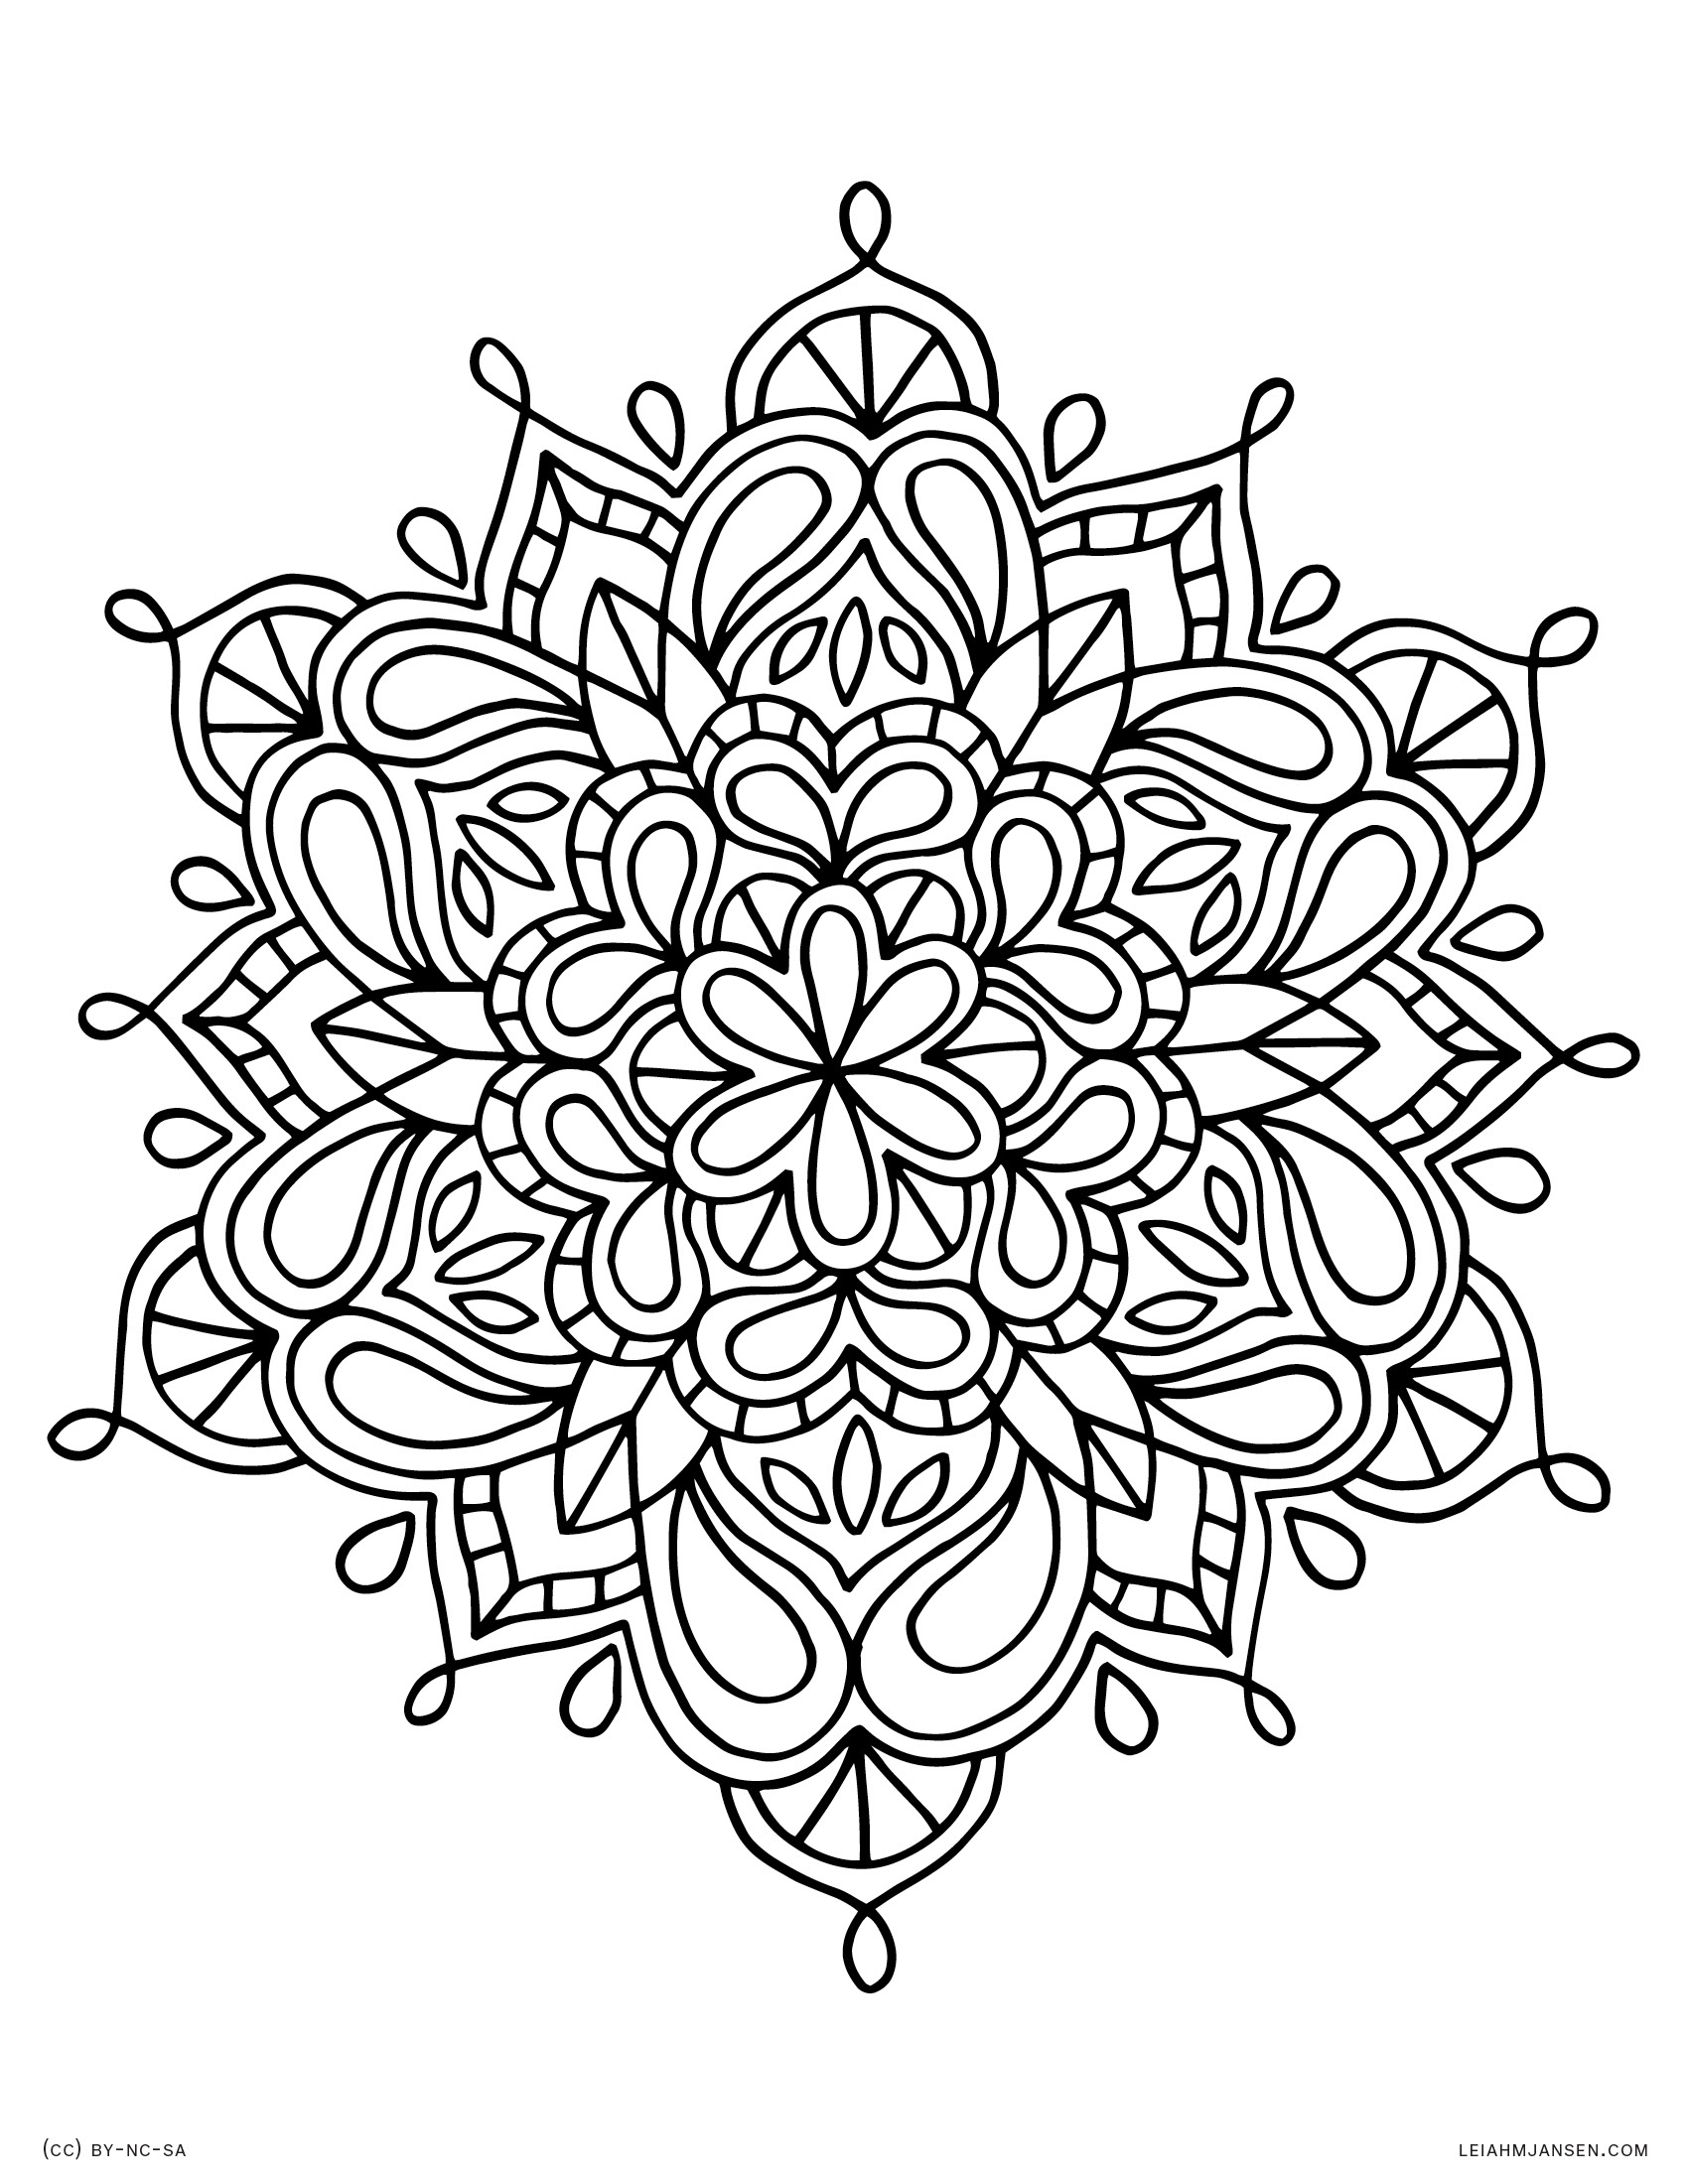 Leiah M Jansen intended for Free Mandalas To Colour In Printable